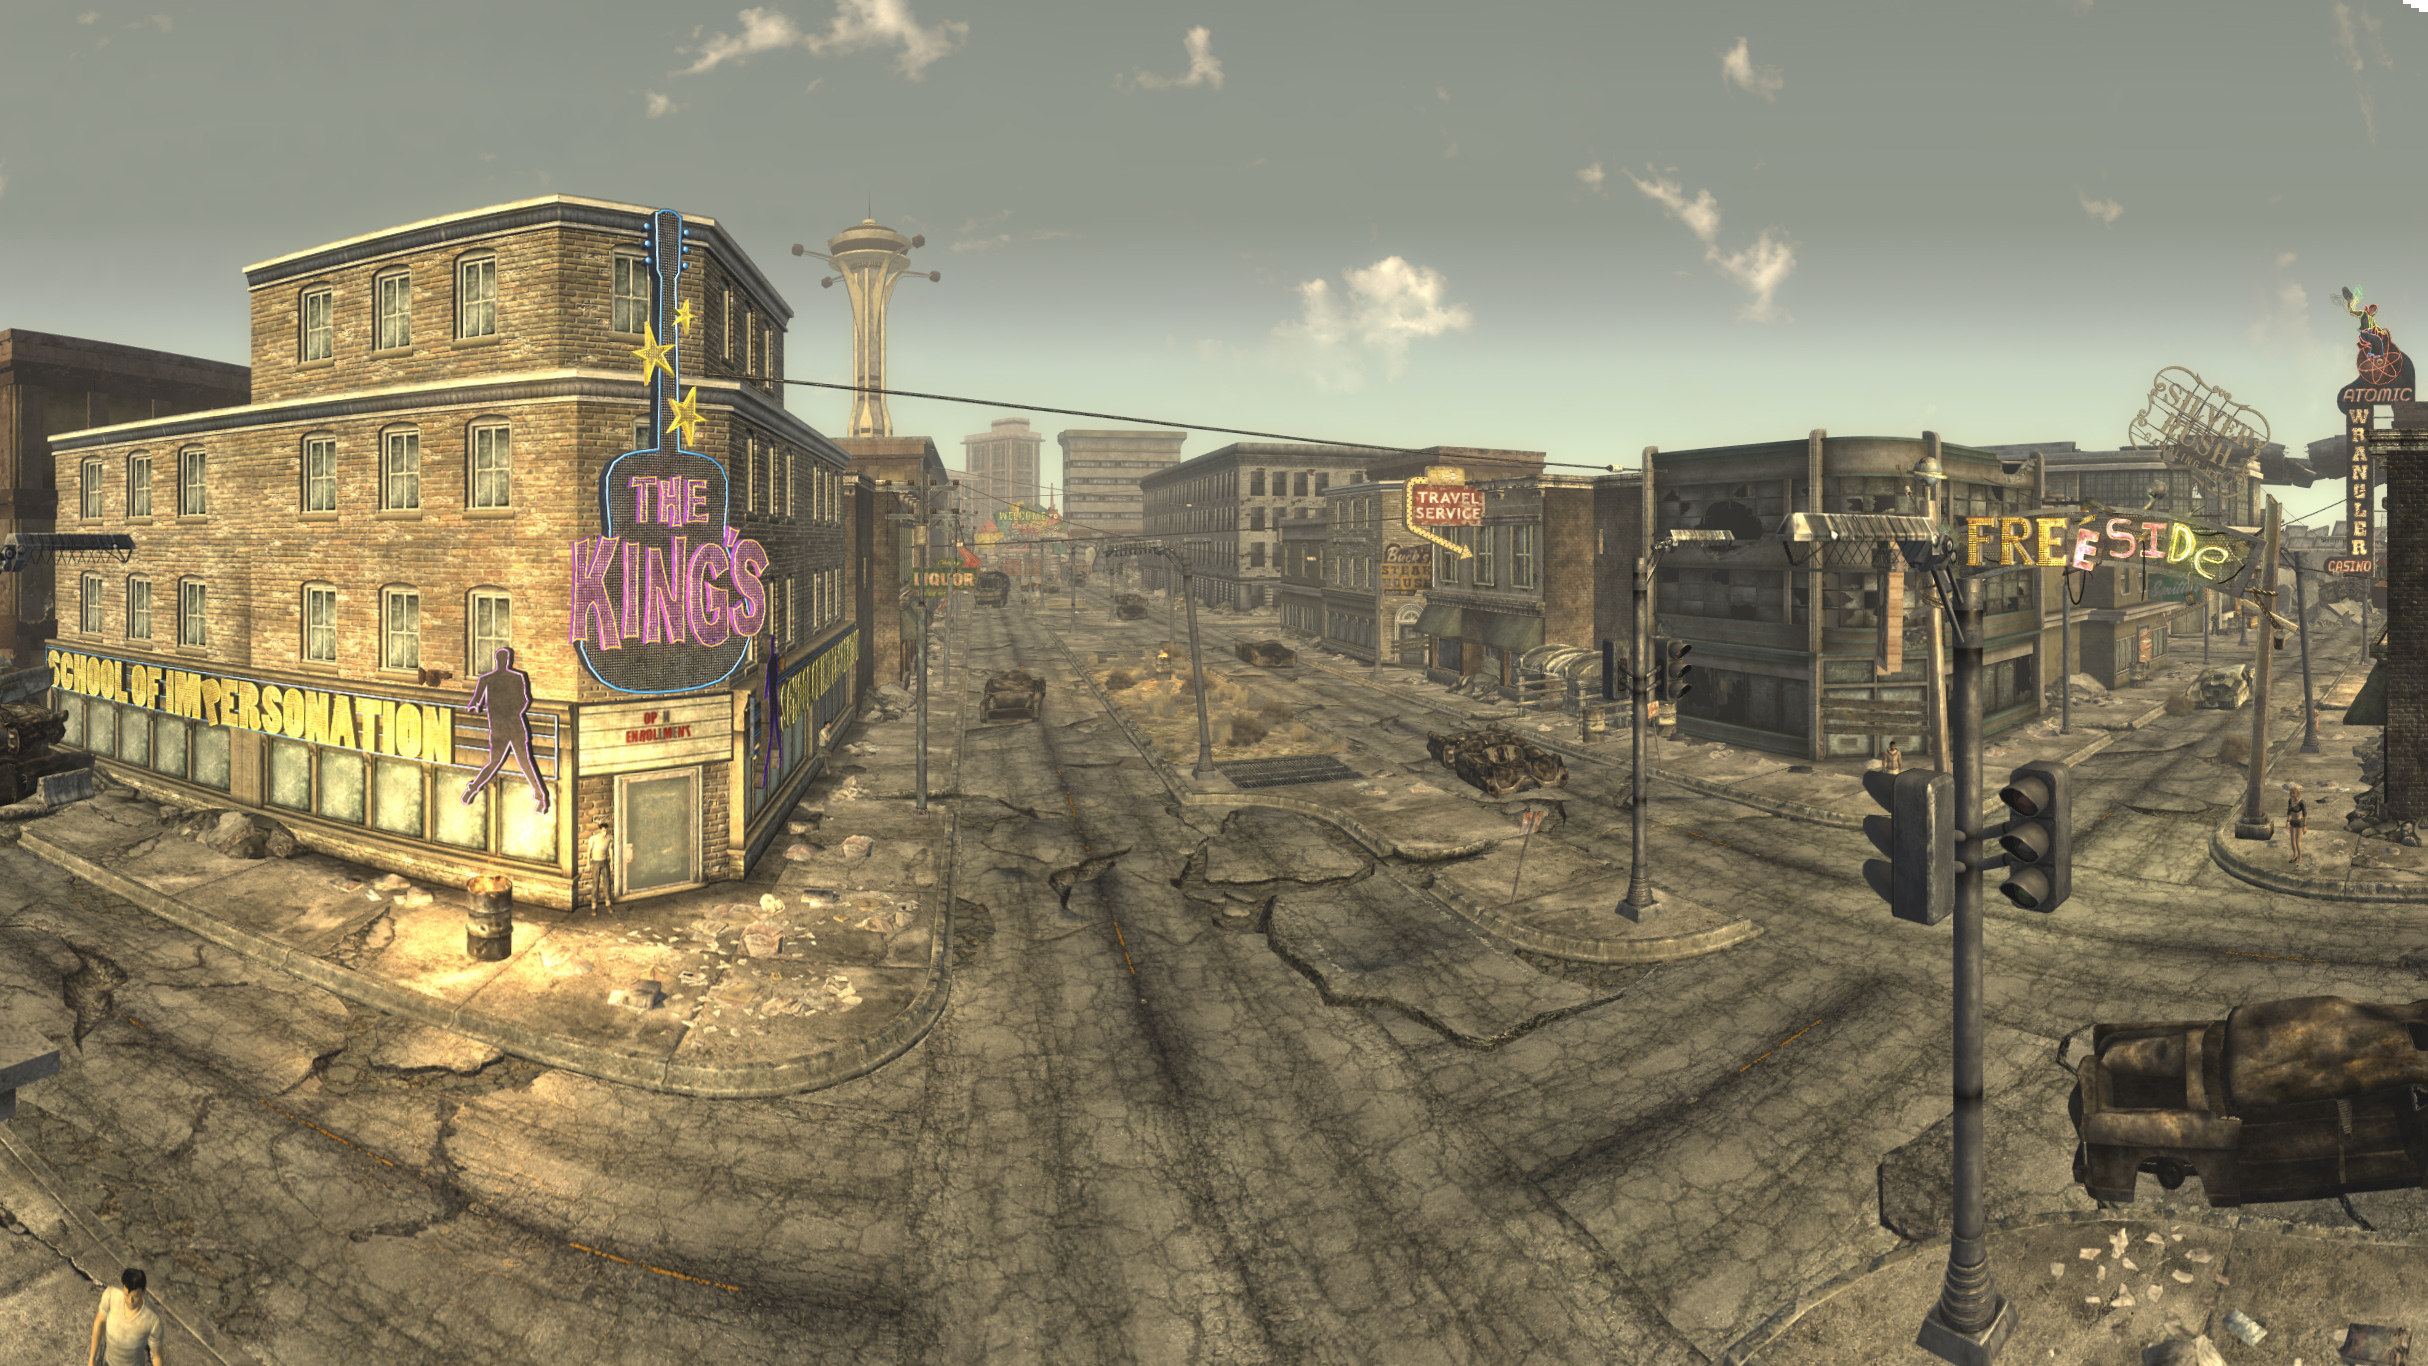 https://vignette.wikia.nocookie.net/fallout/images/9/9d/Freeside_arial.jpg